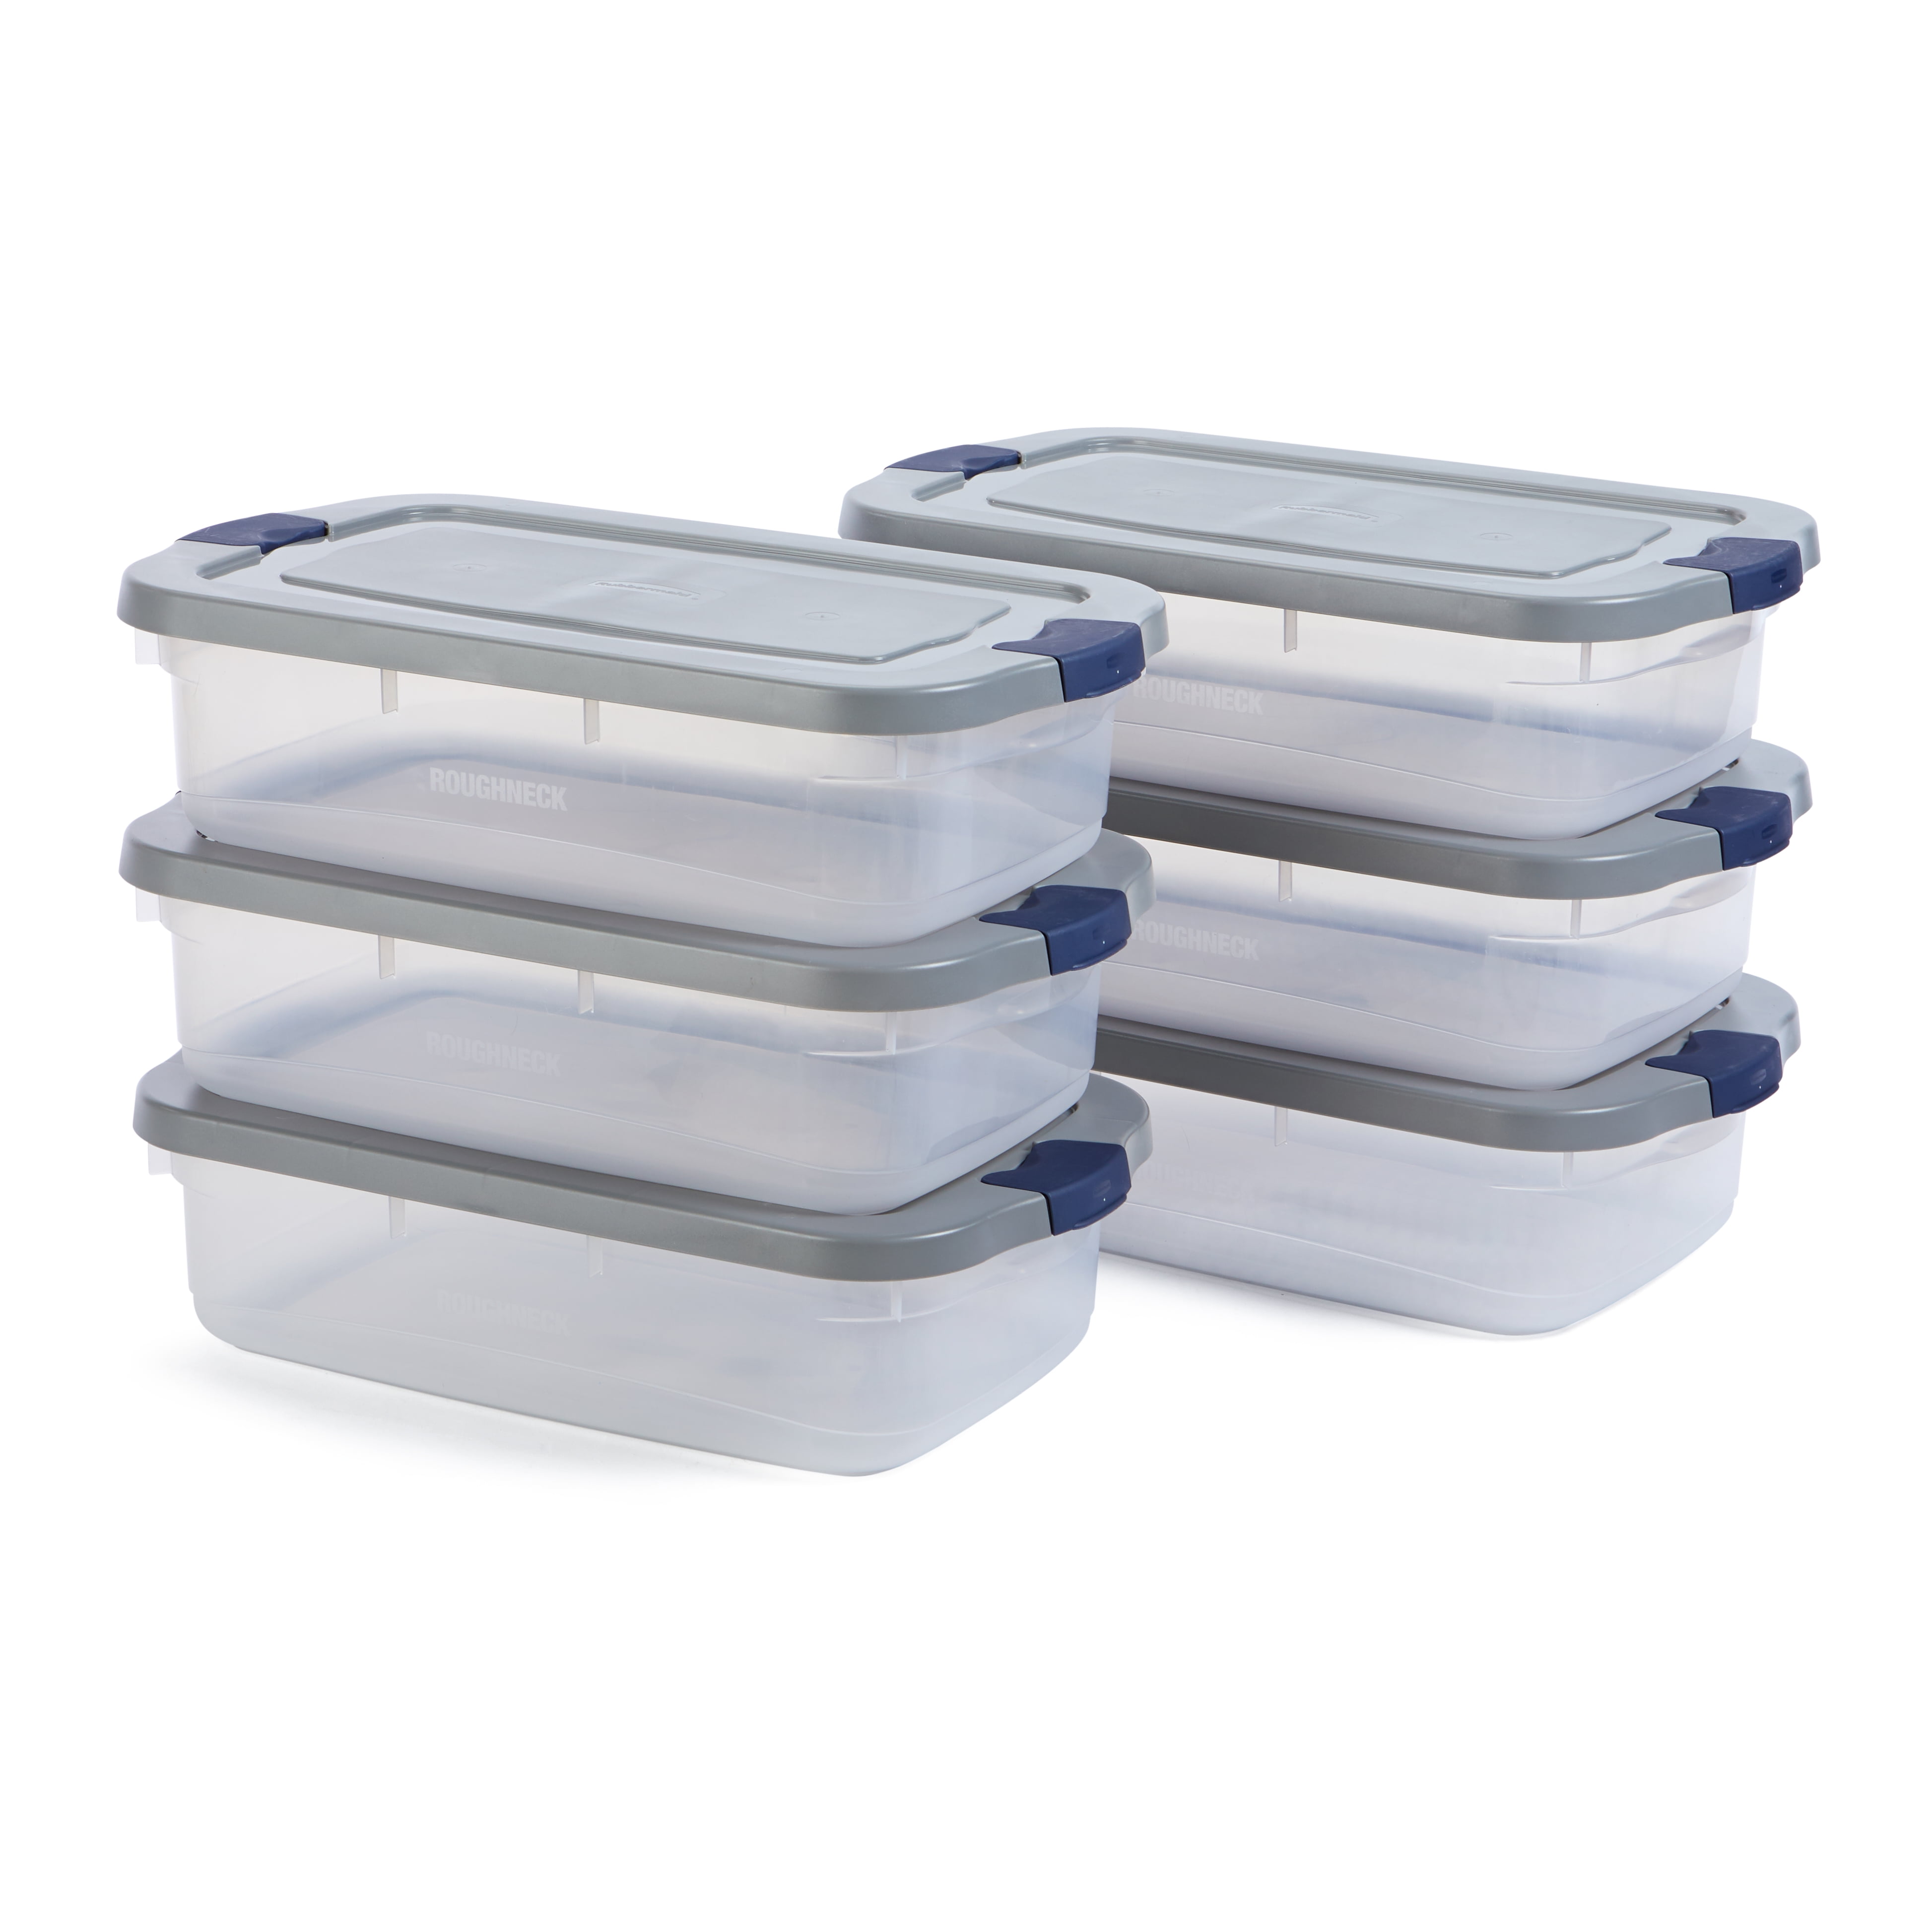  Utensilux Rubbermaid Storage Containers, Easy Find Lids, Teal,  3, 5, 7 cup set, Flex & Seal, Leak Proof Lids, Food Storage Set, Clear Meal  Prep Flex Containers, Assortment: Home & Kitchen